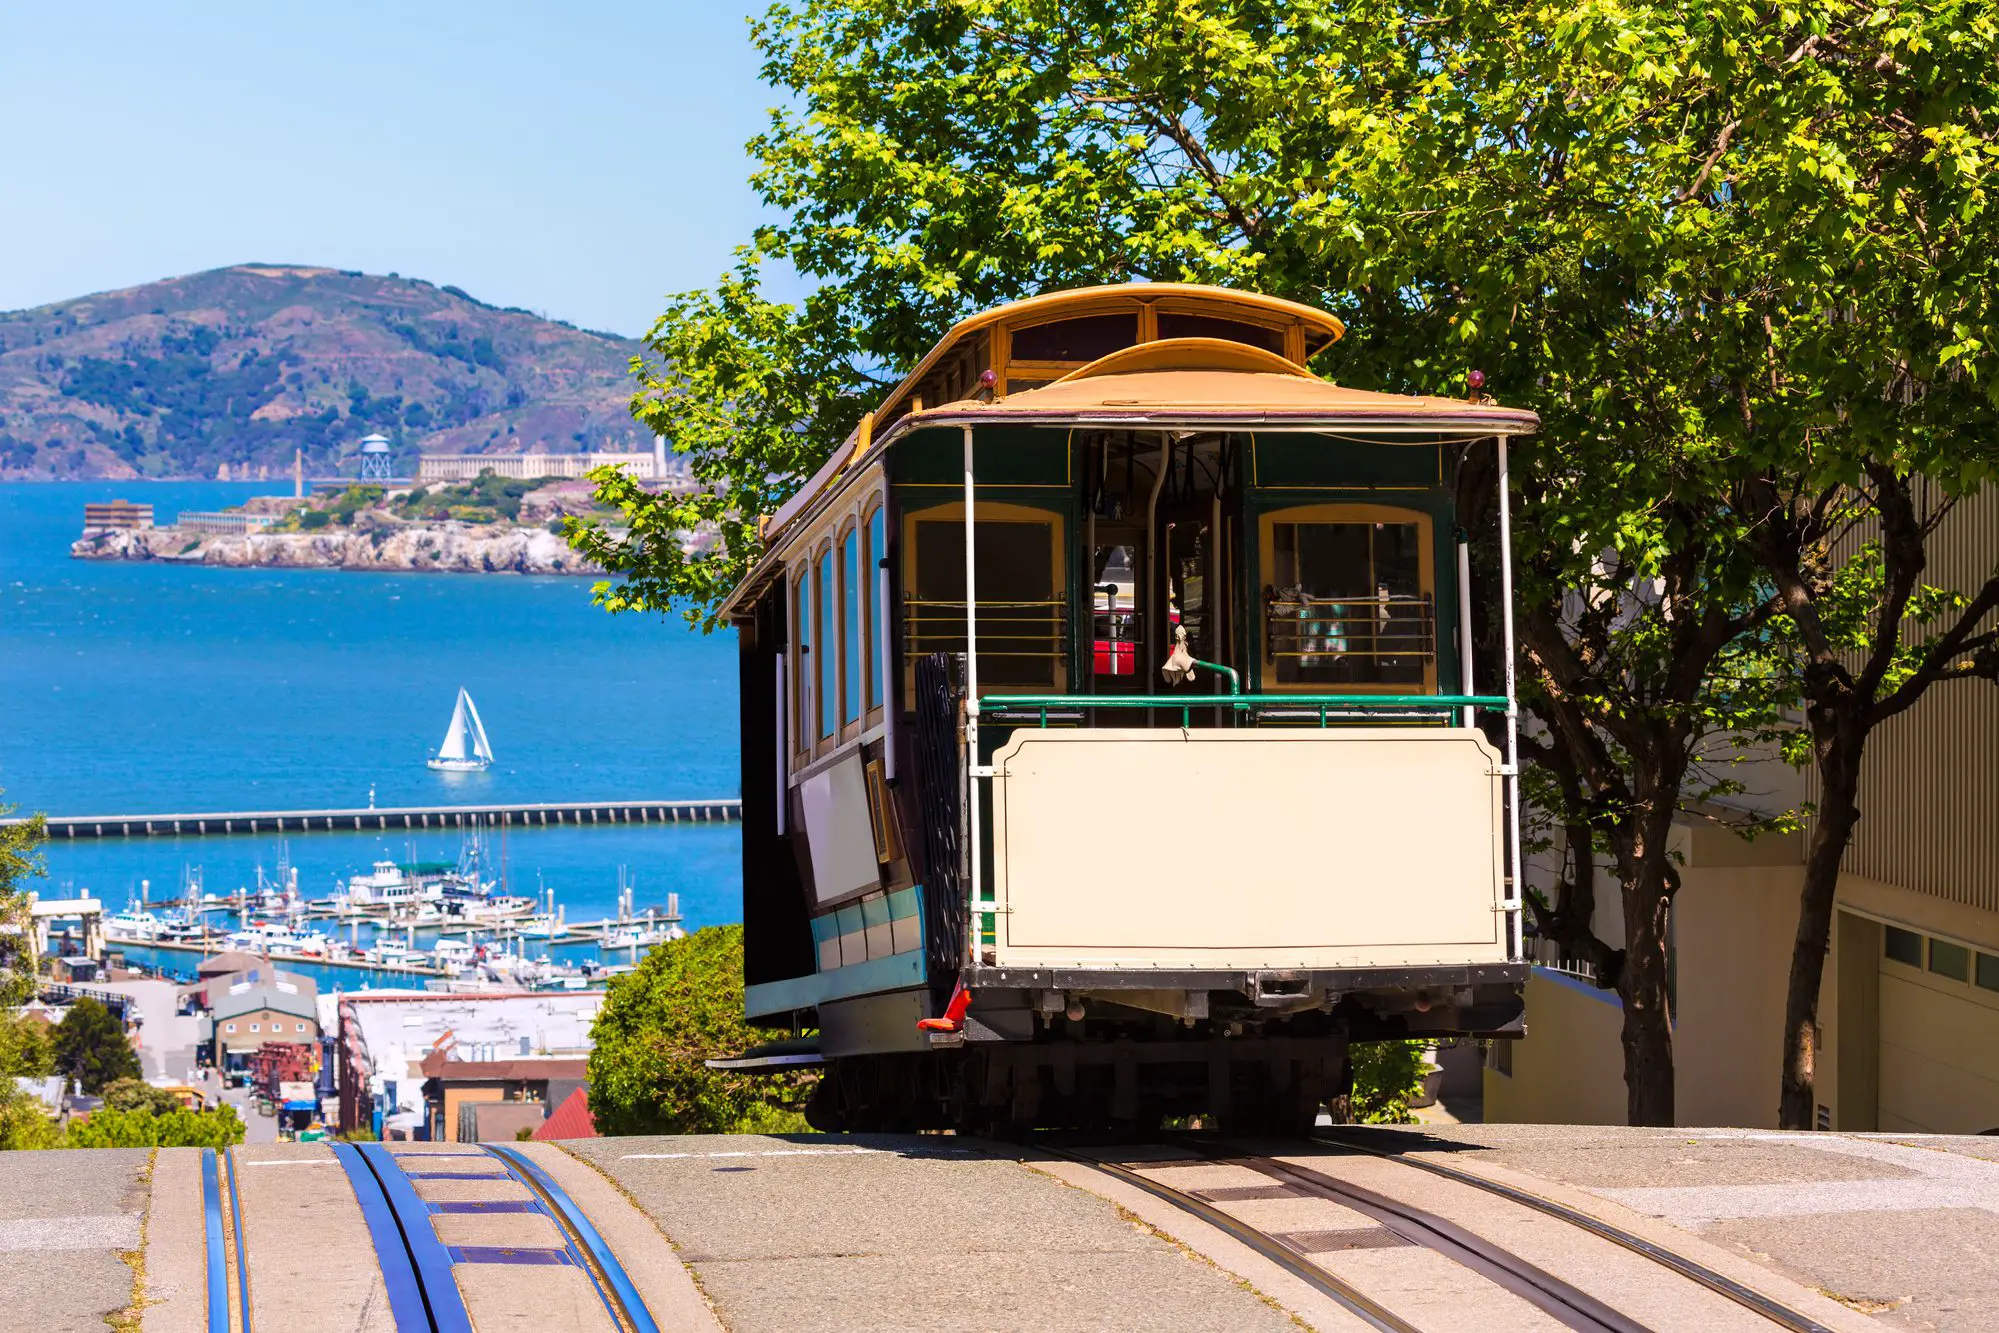 San Francisco trolley at top of hill with the bay in the background